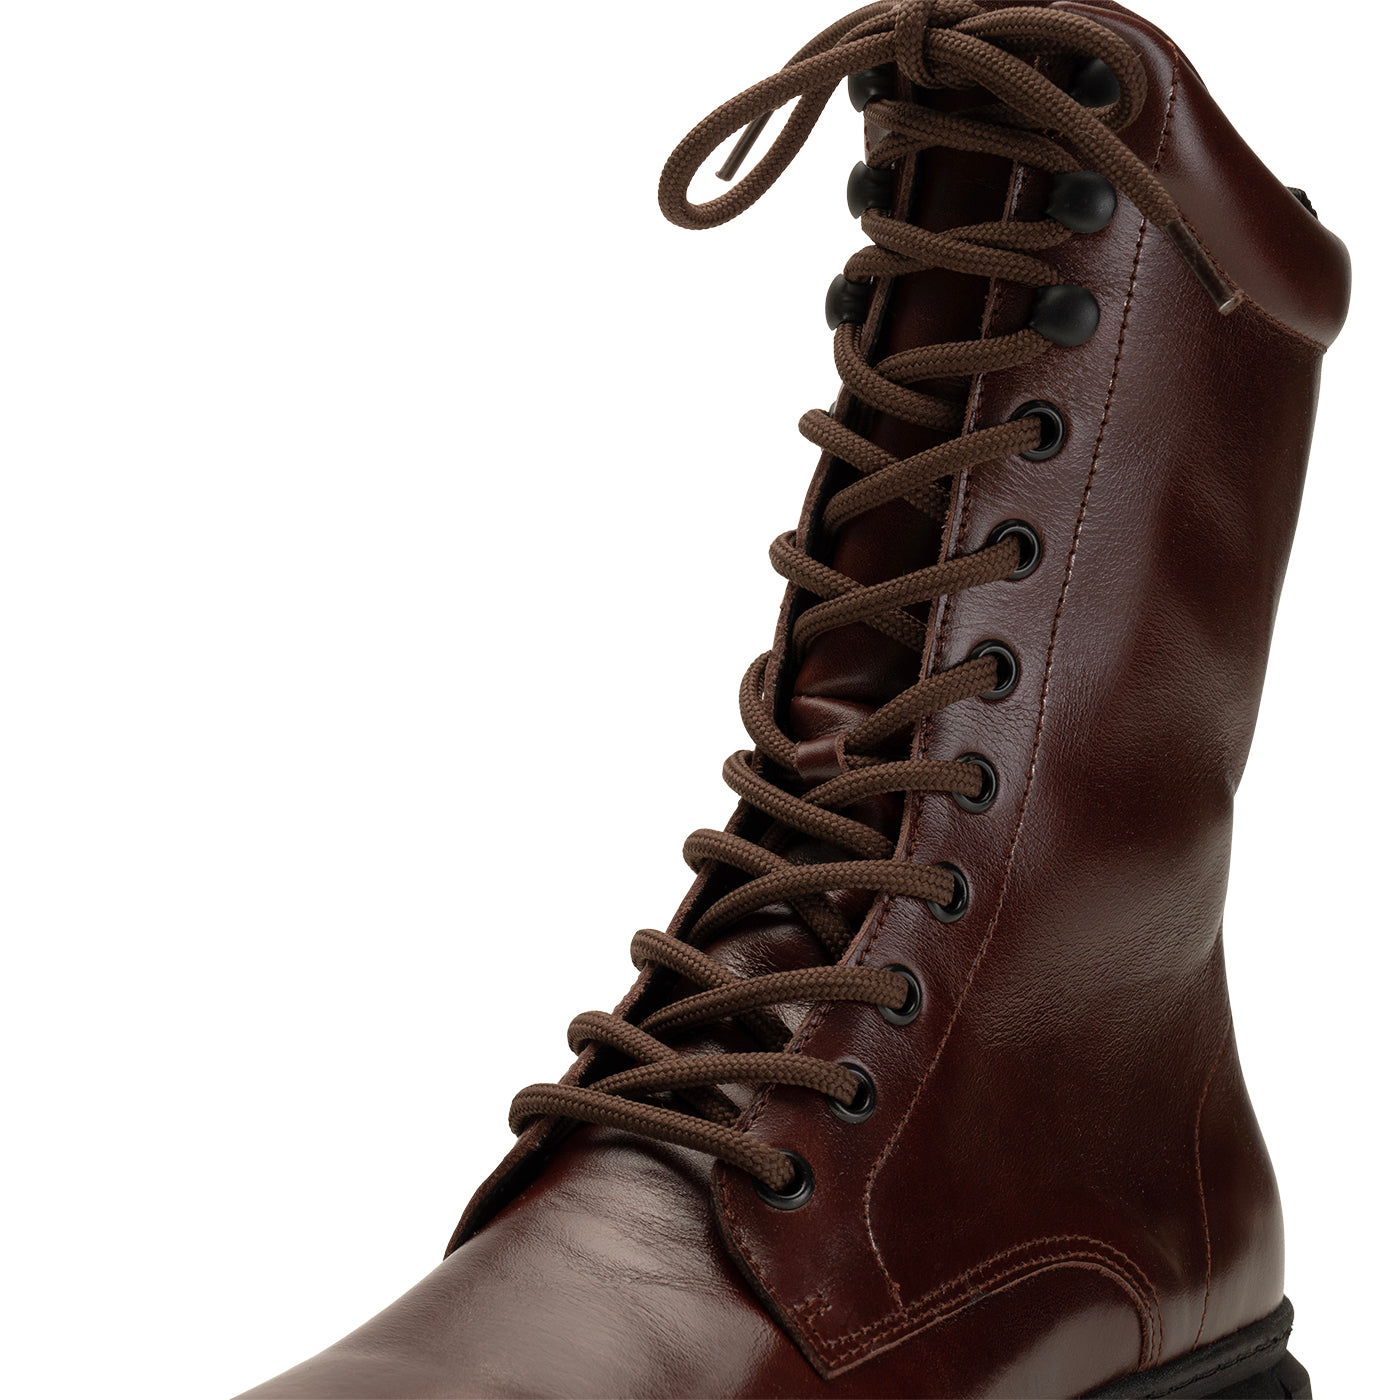 SHOE THE BEAR WOMENS Tove lace up boot leather Boots 130 BROWN